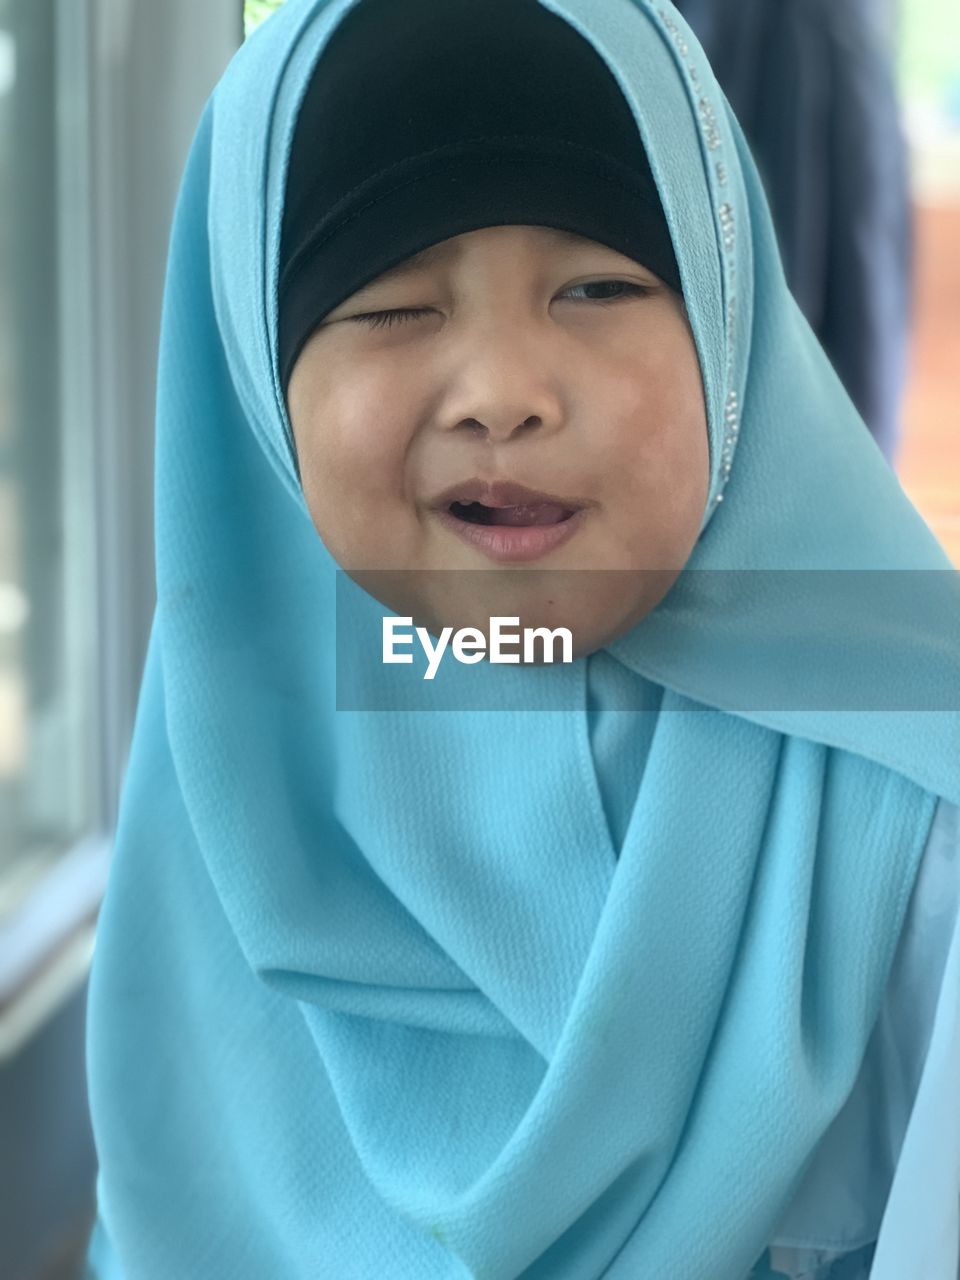 portrait, hijab, blue, child, childhood, one person, hood, hood - clothing, headscarf, looking at camera, headshot, clothing, person, emotion, men, baby, front view, hooded shirt, smiling, female, happiness, close-up, day